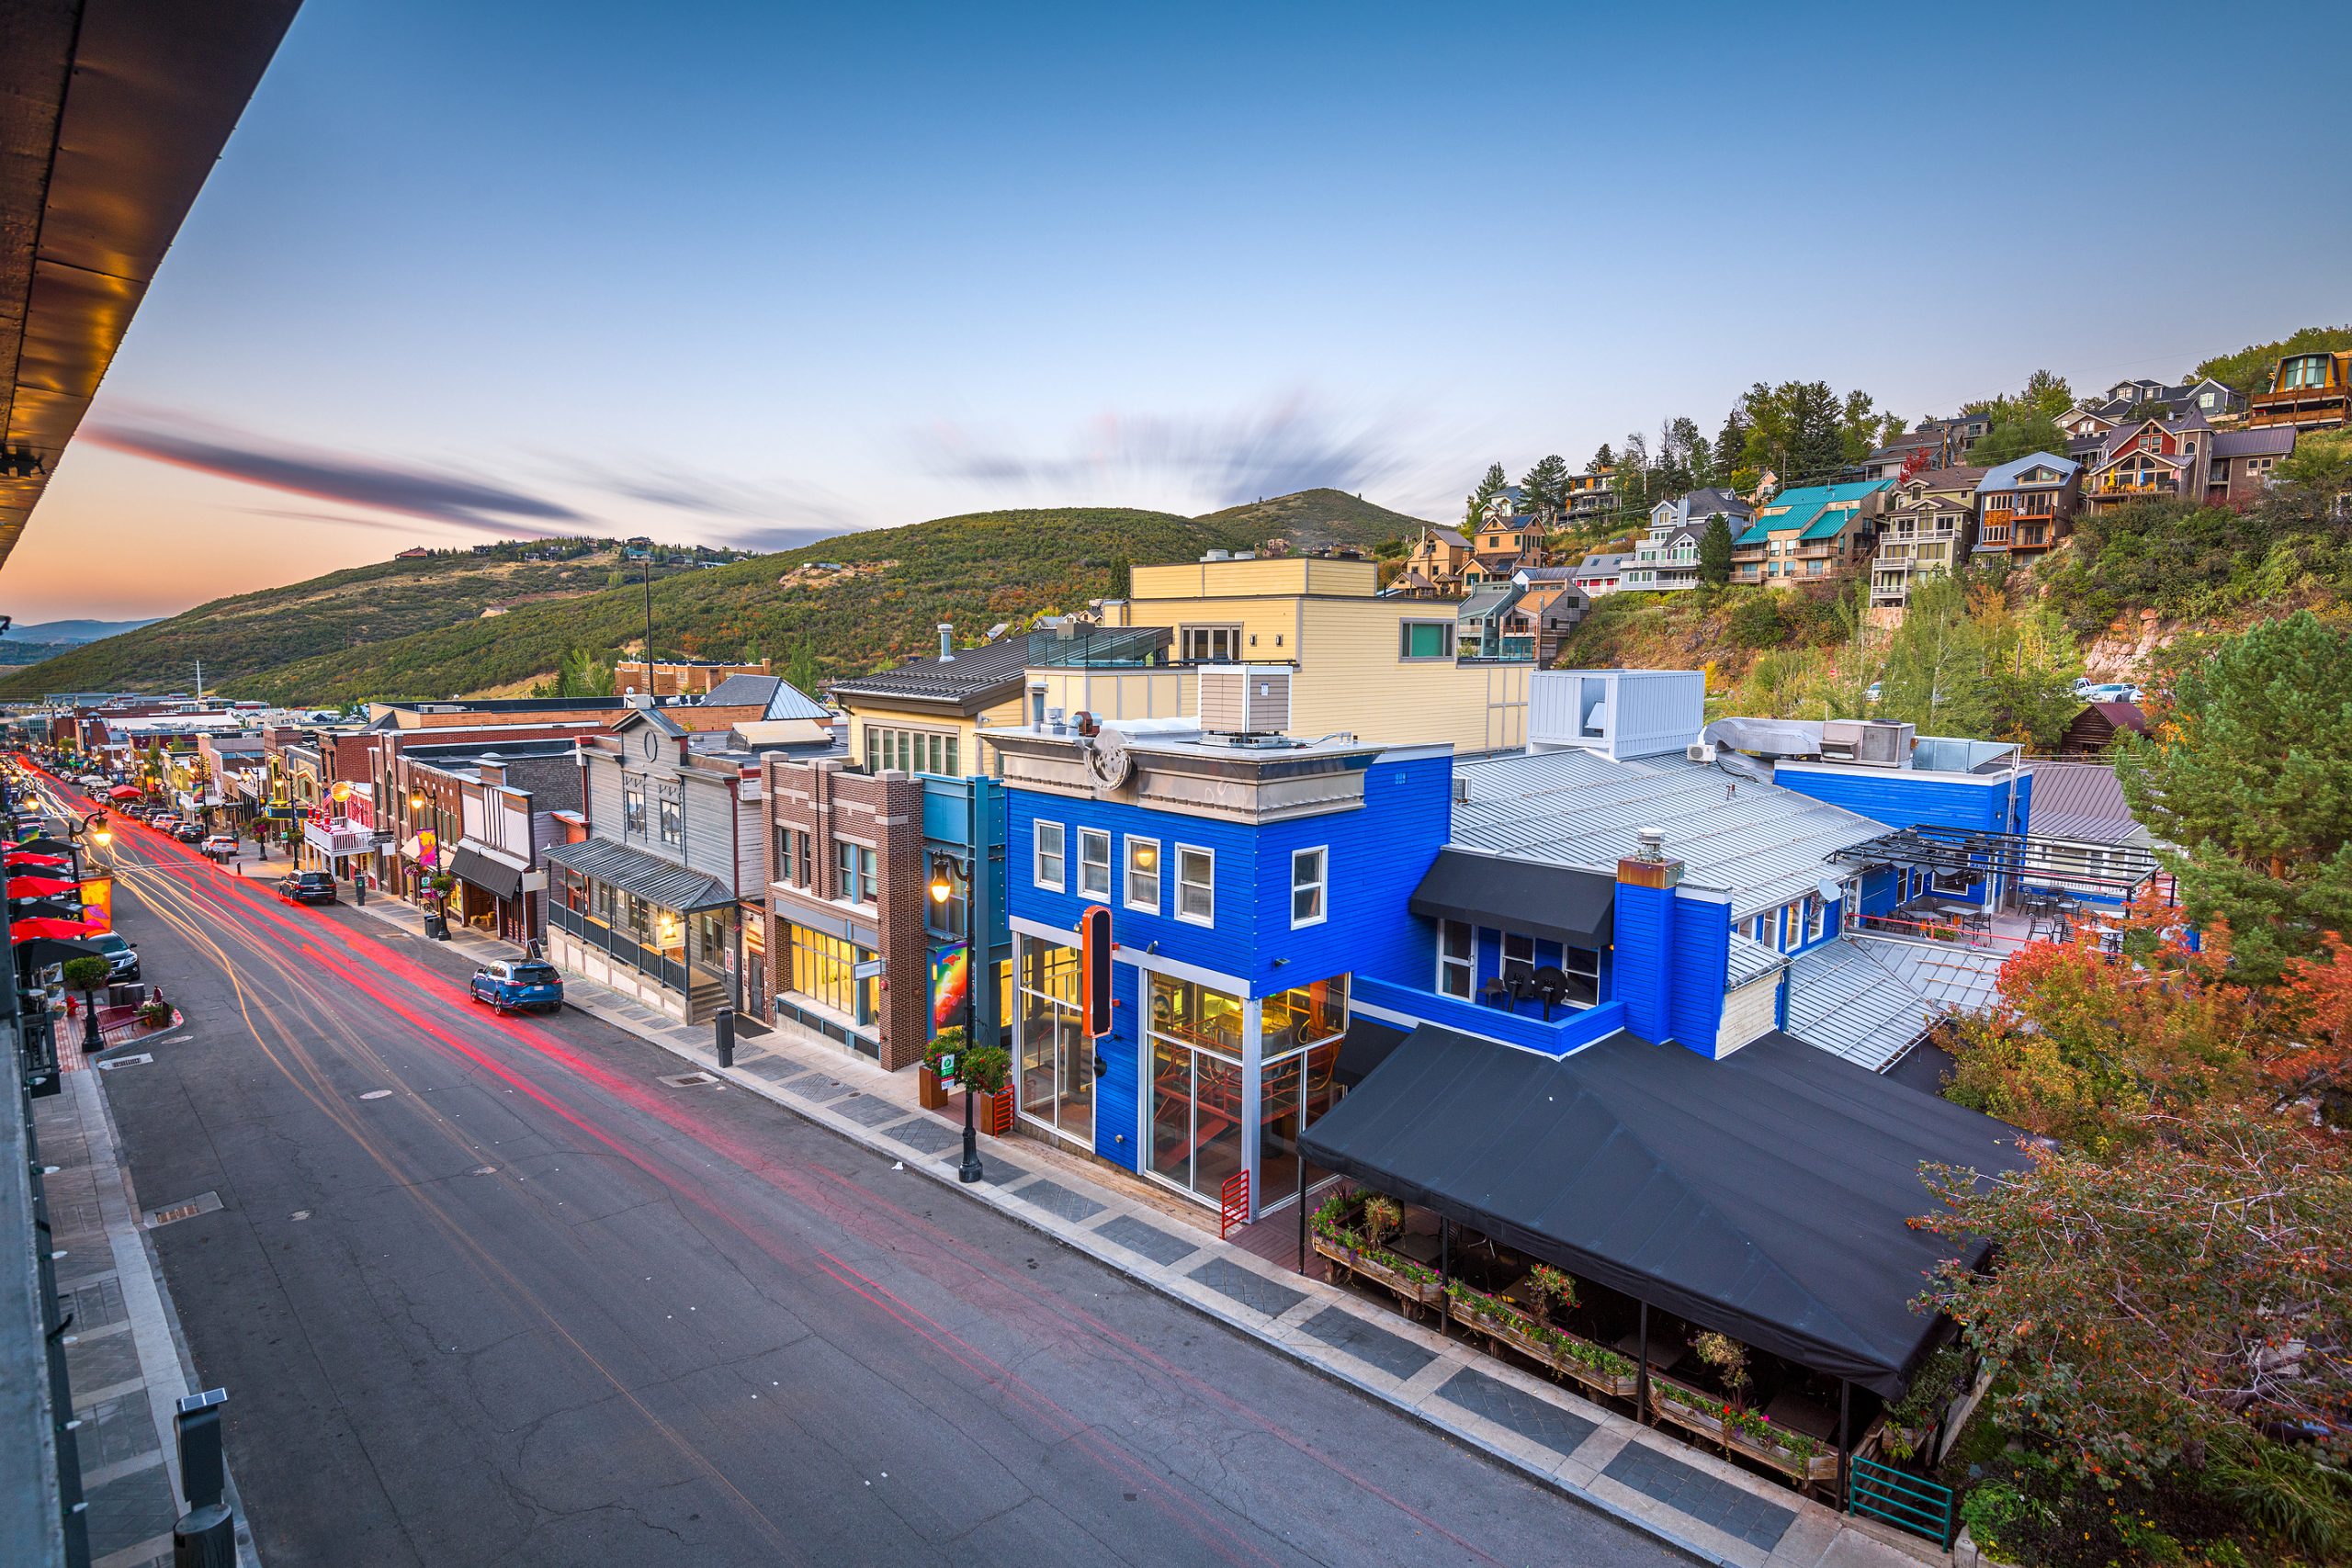 If you’re looking for good places to eat in Park City, Utah, you can drive past those fast-food drive-thrus. Don’t stop at the chain restaurants either. Park City is filled with tasty dining options, and we’ve rounded up a list of some of the best places to eat in Park City.